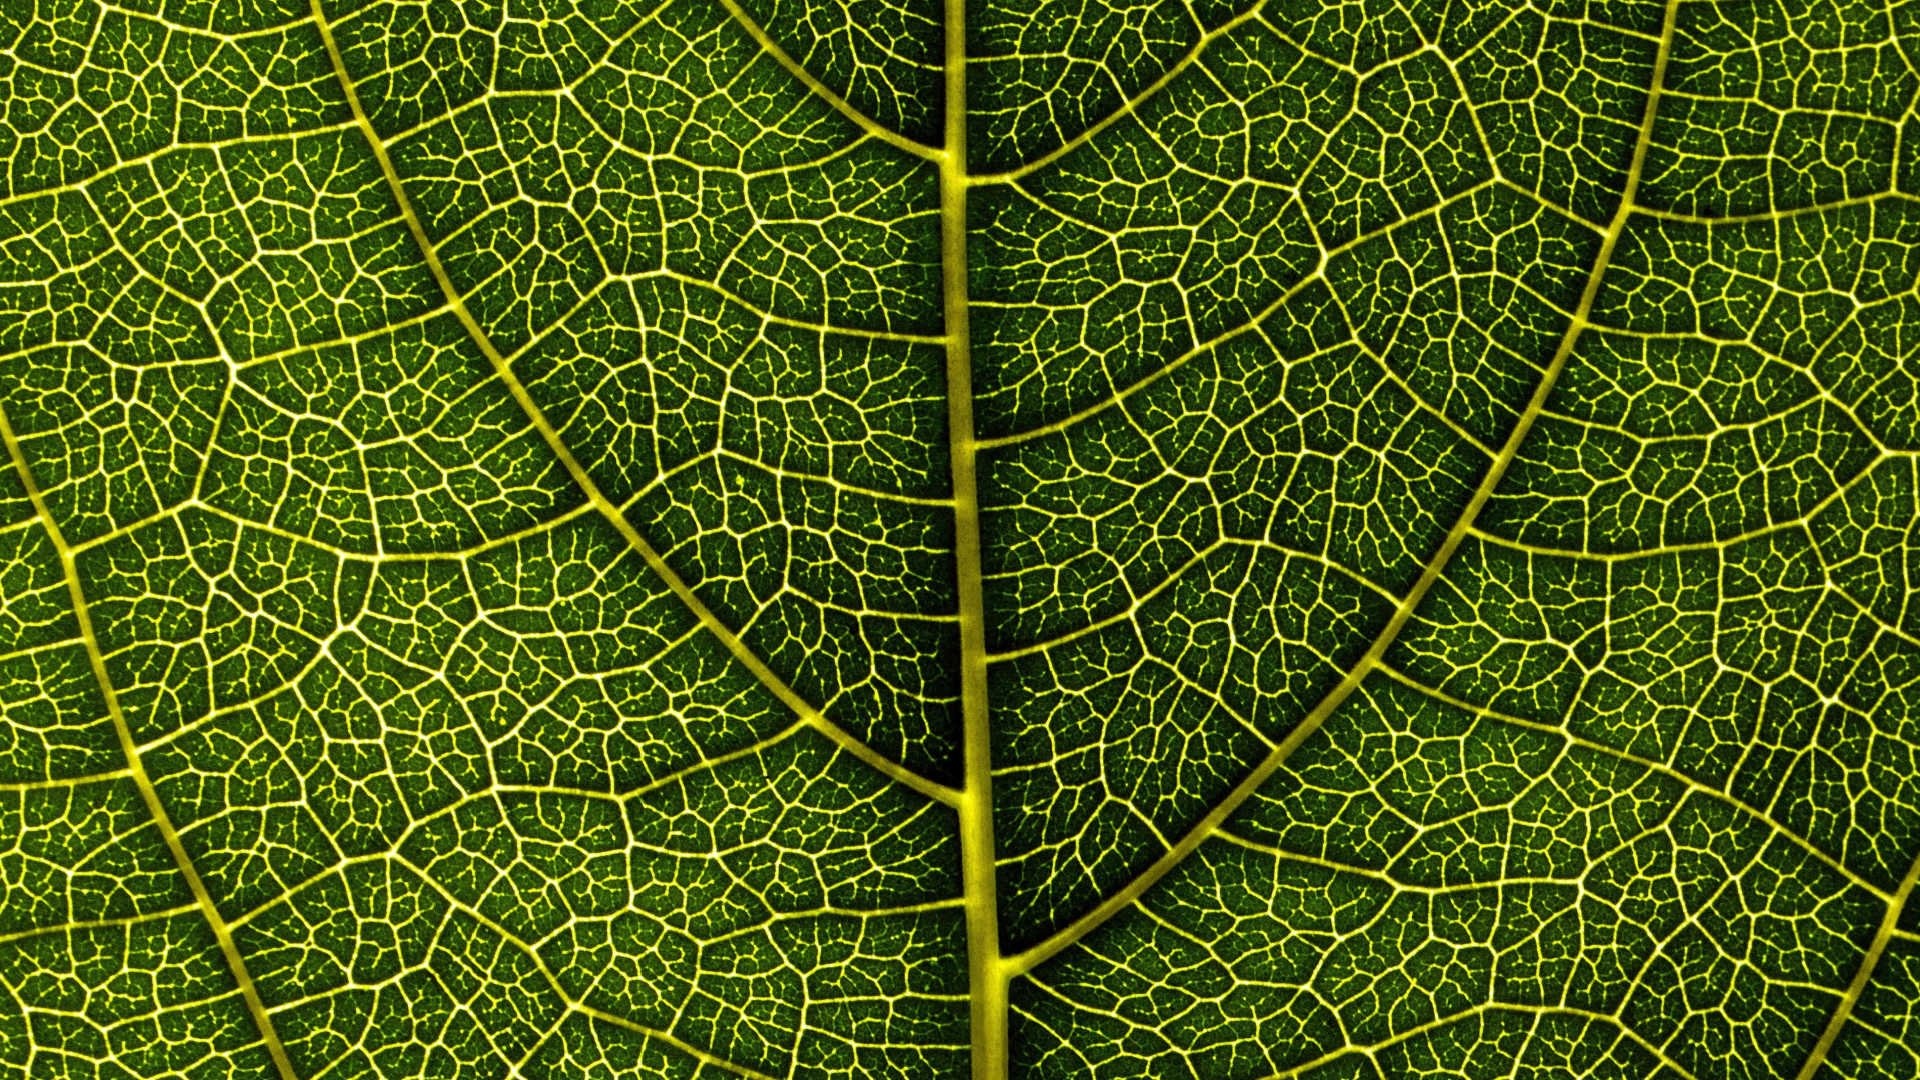 A macro view of a green leaf showing the intricate details of the leaf's pattern